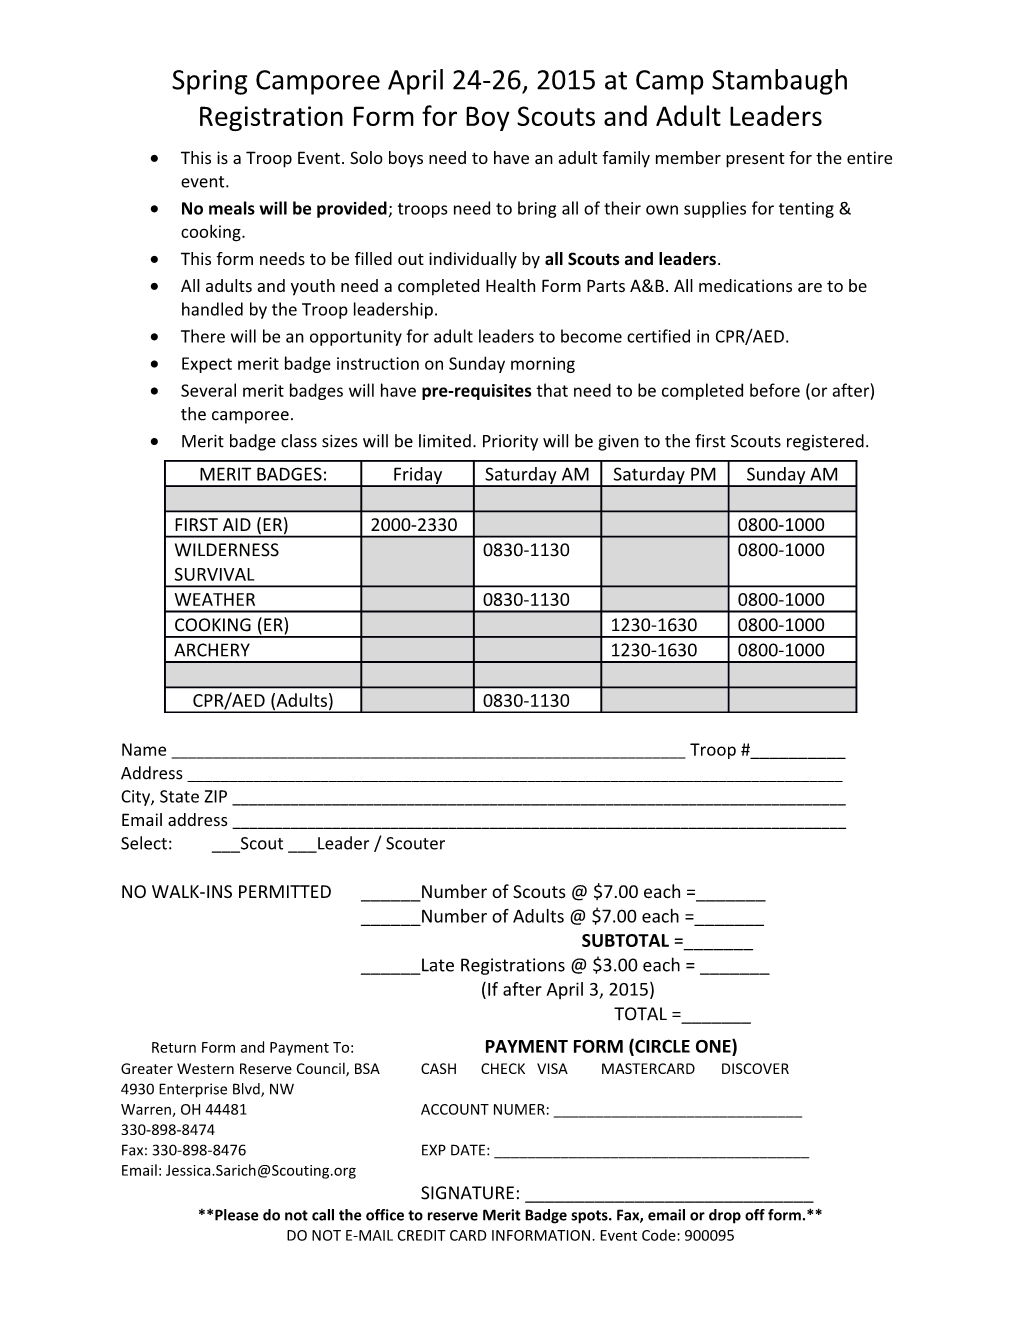 Registration Form for Boy Scouts and Adult Leaders